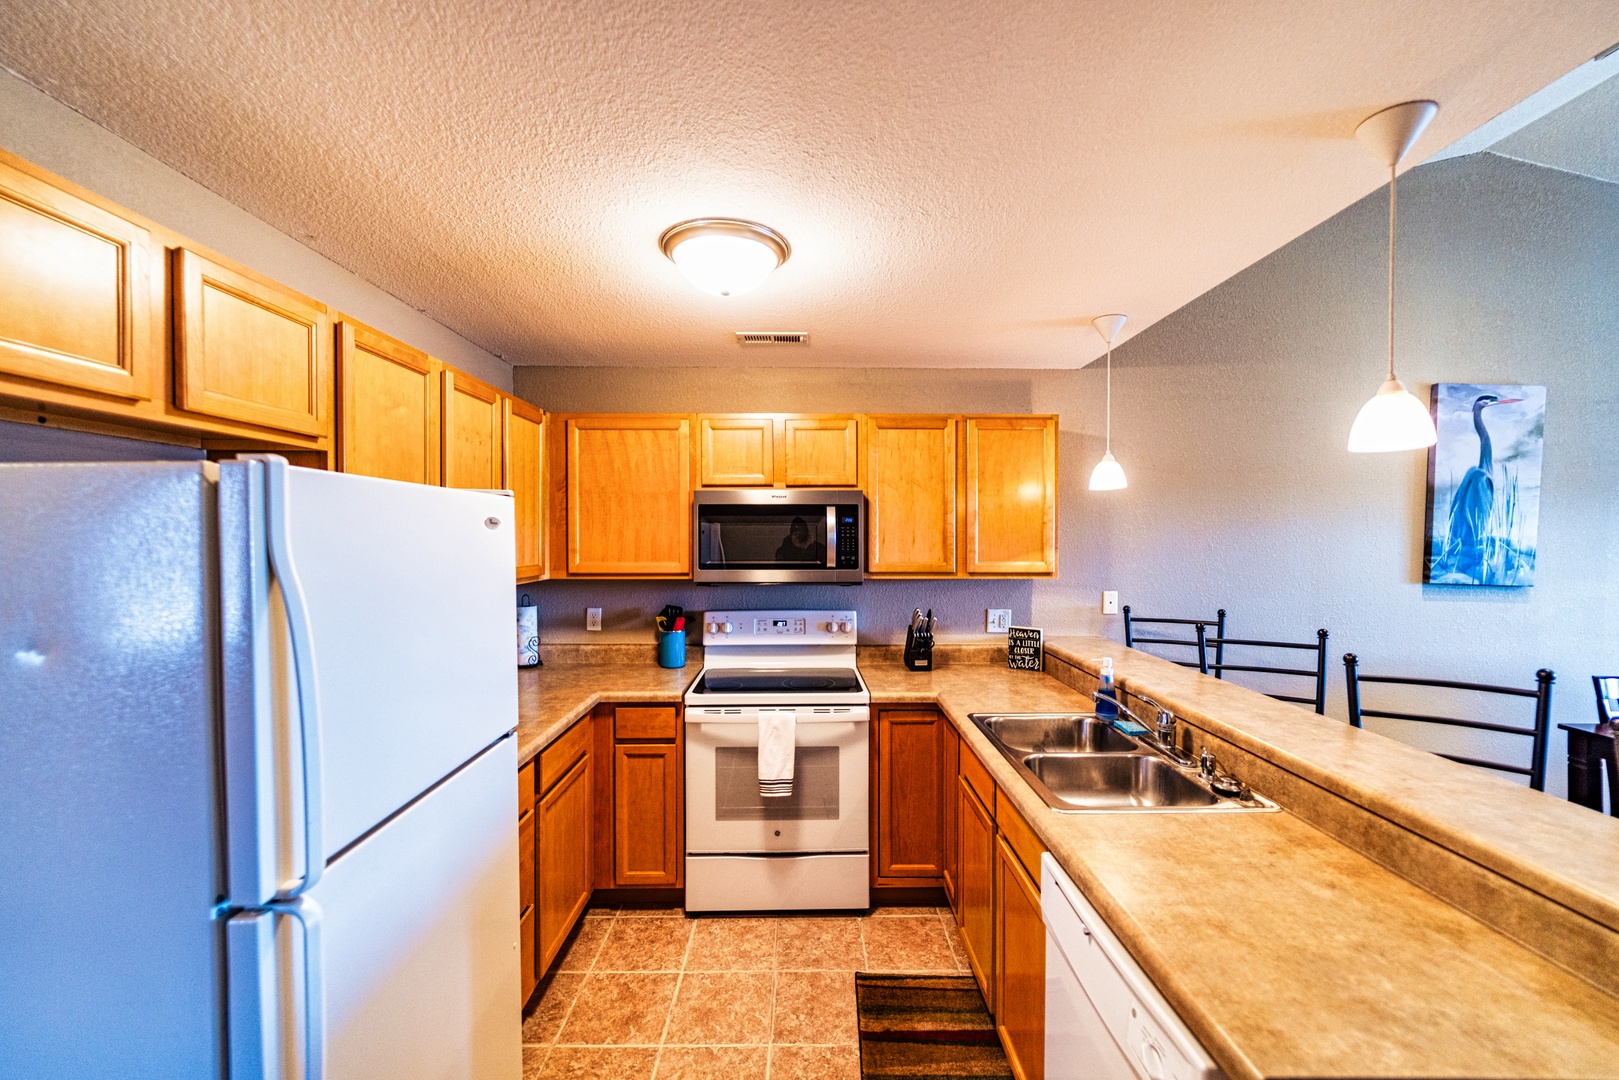 This quaint kitchen offers ample space & all the comforts of home